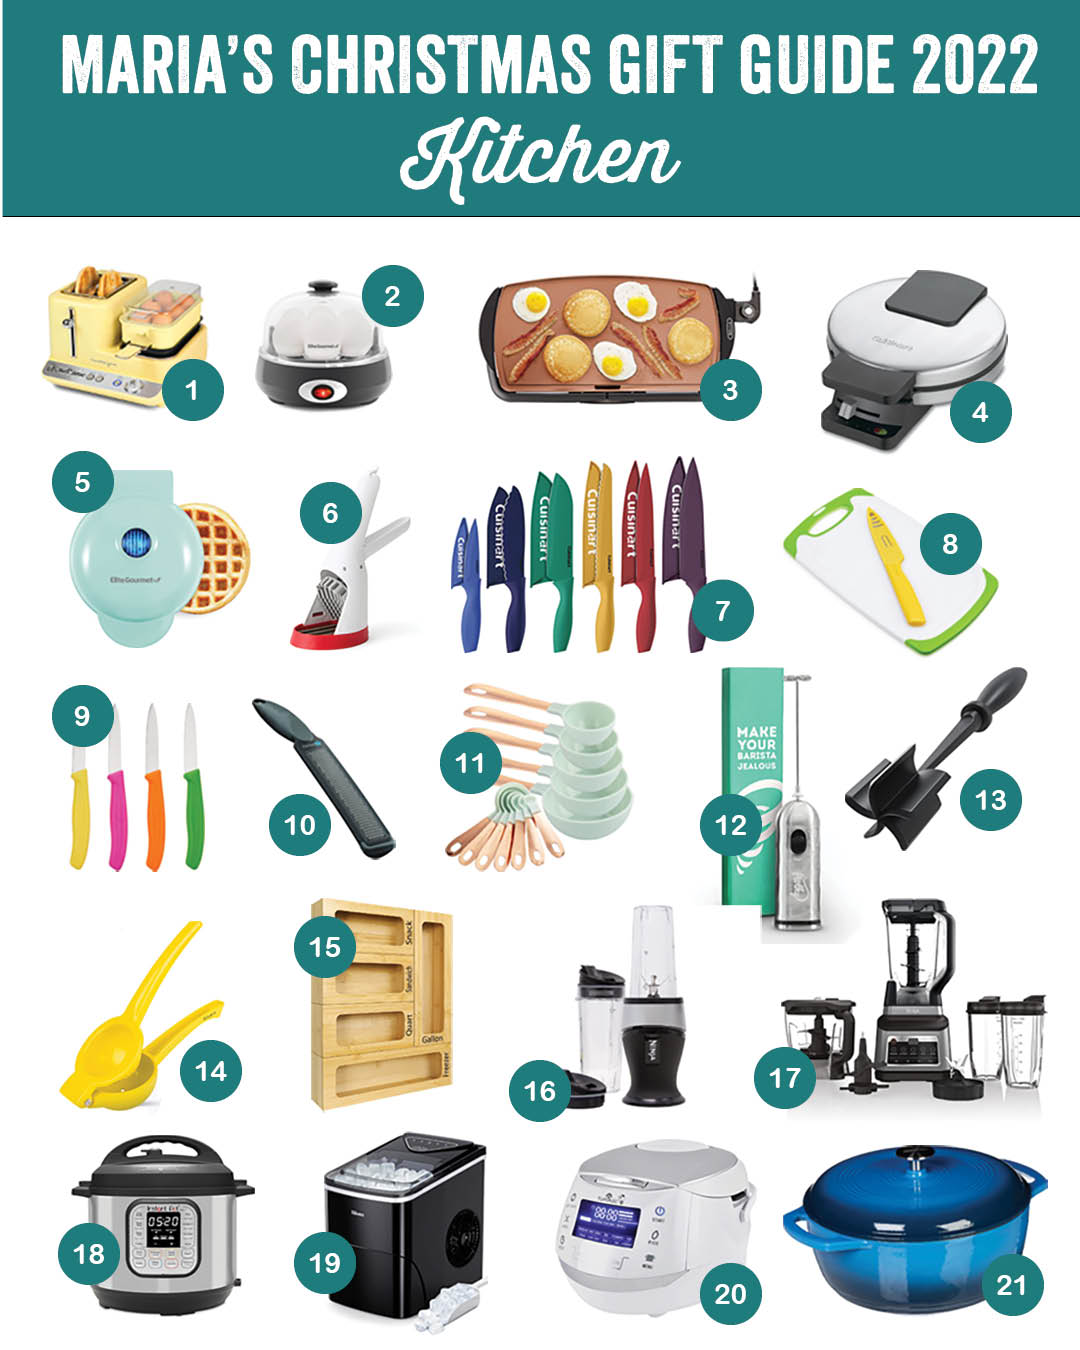 2022 Kitchen Gift Guide: My Top 55 Favorite Kitchen Gifts - a